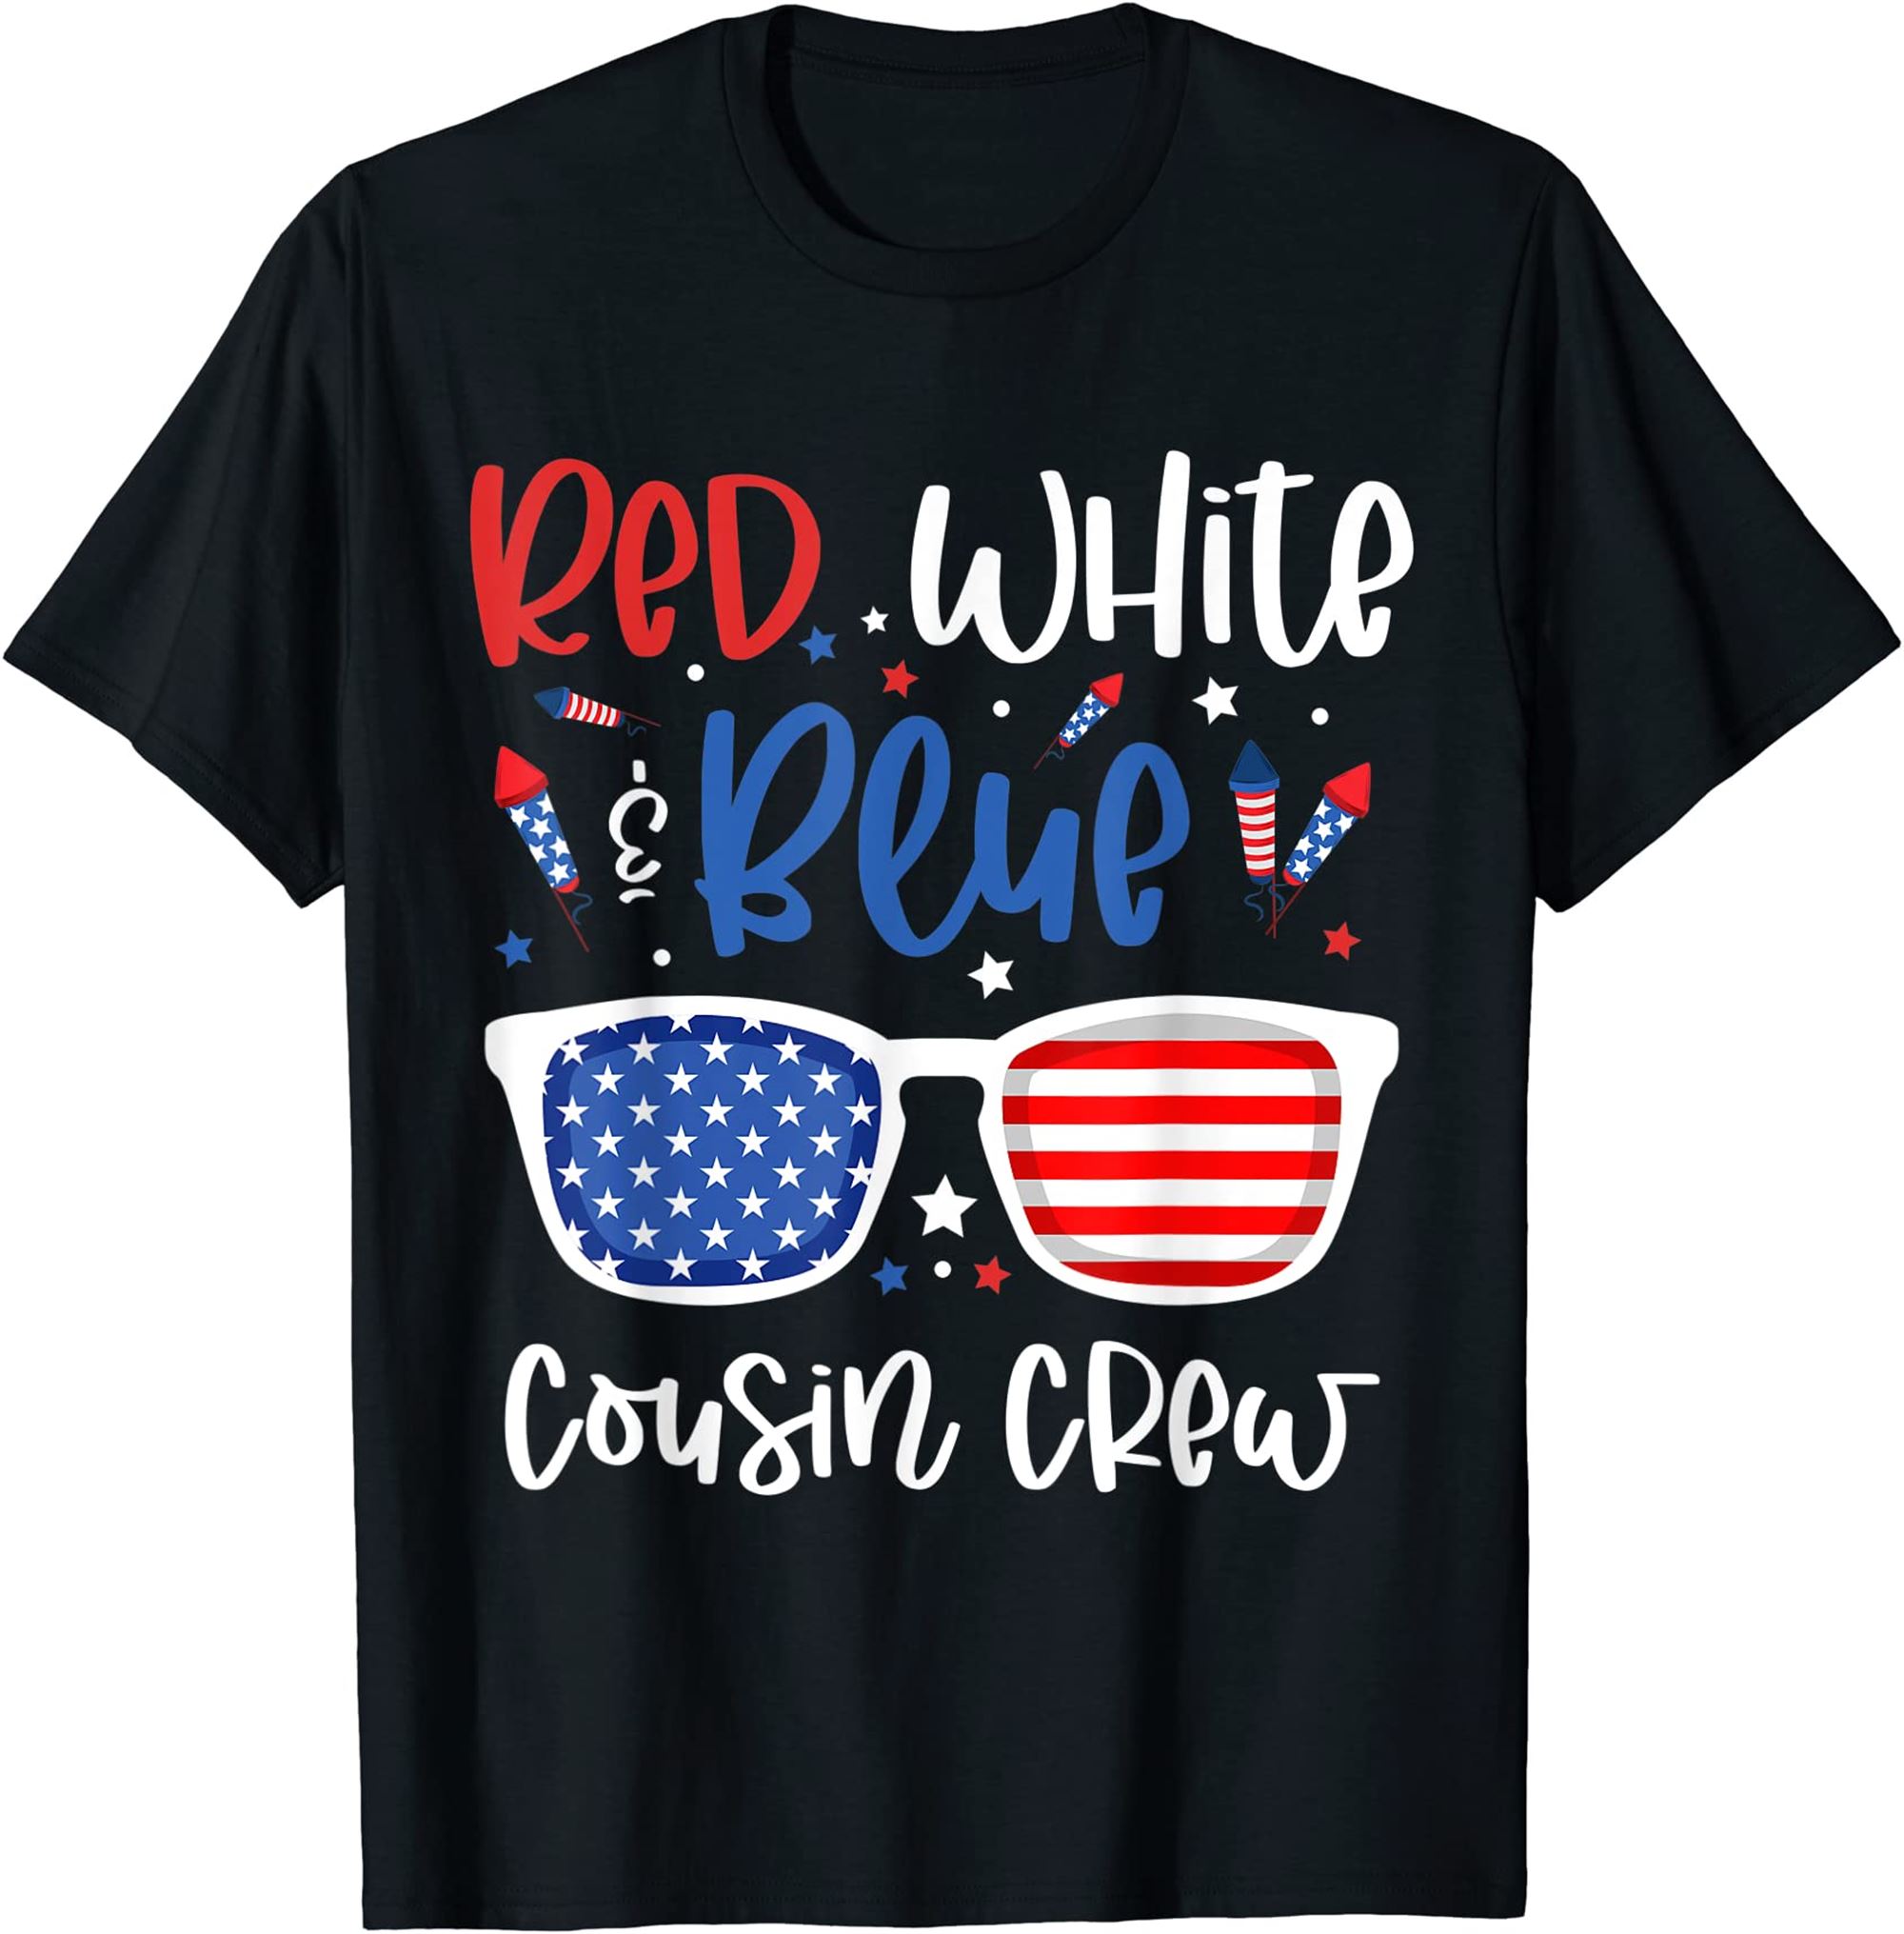 Red White Blue Cousin Crew 4th Of July Kids Usa Sunglasses T-shirt Size Up To 5xl